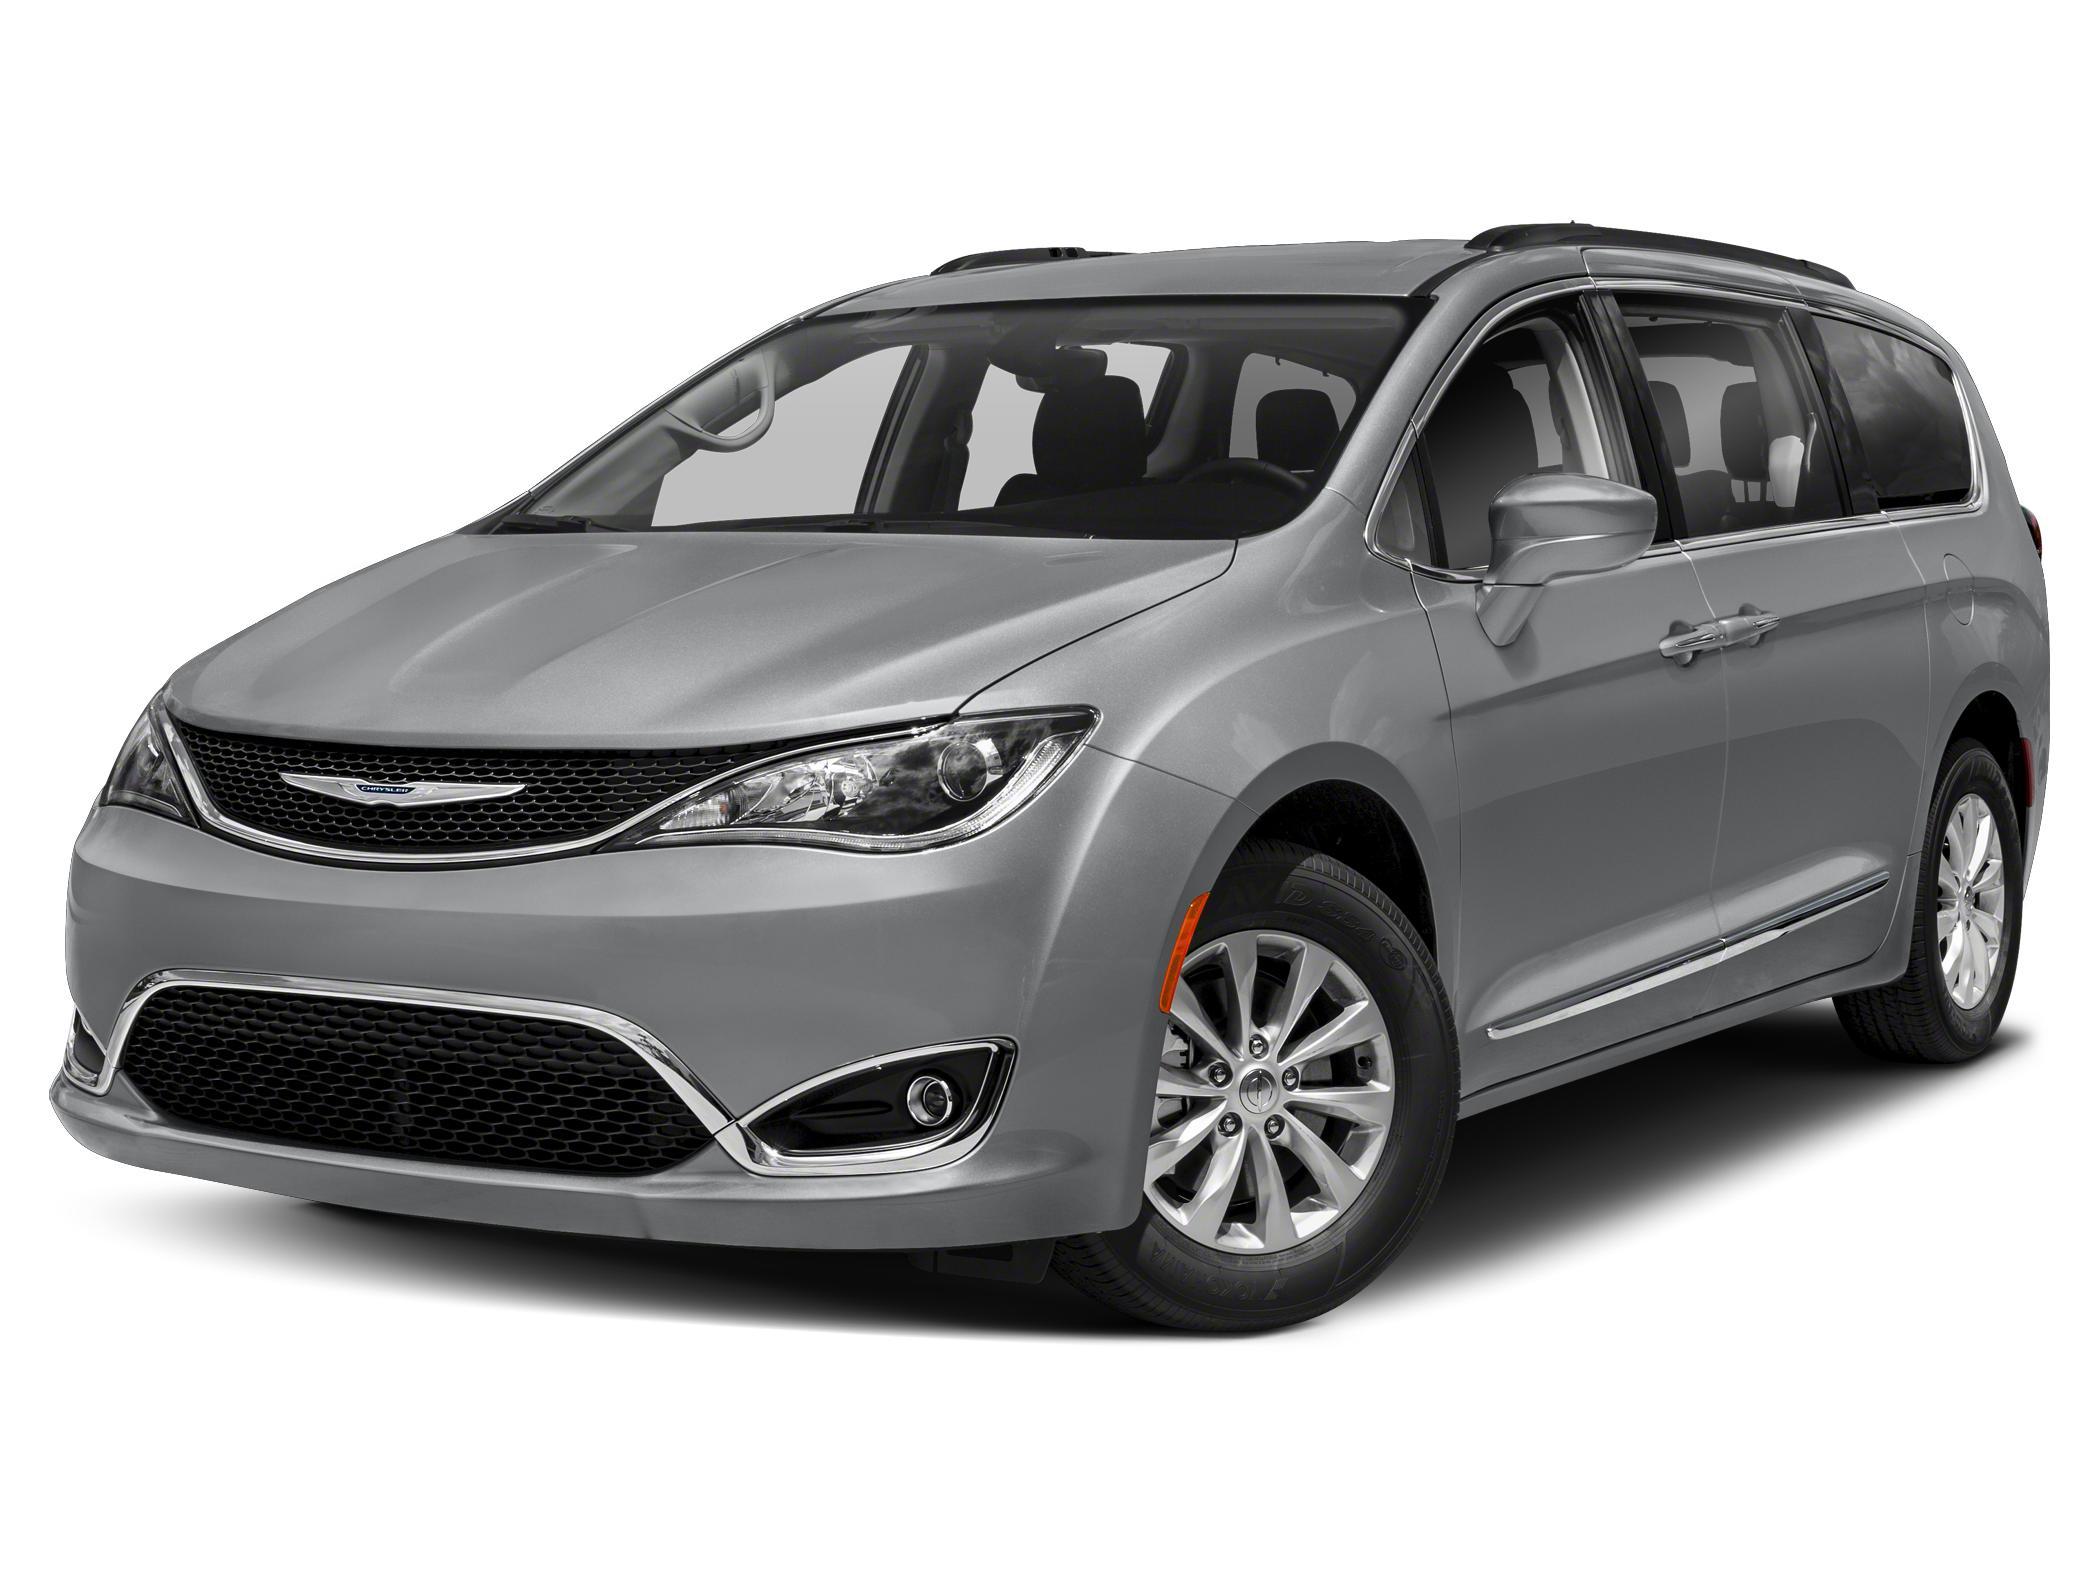 2020 Chrysler Pacifica Reviews, Price, MPG and More | Capital One Auto  Navigator